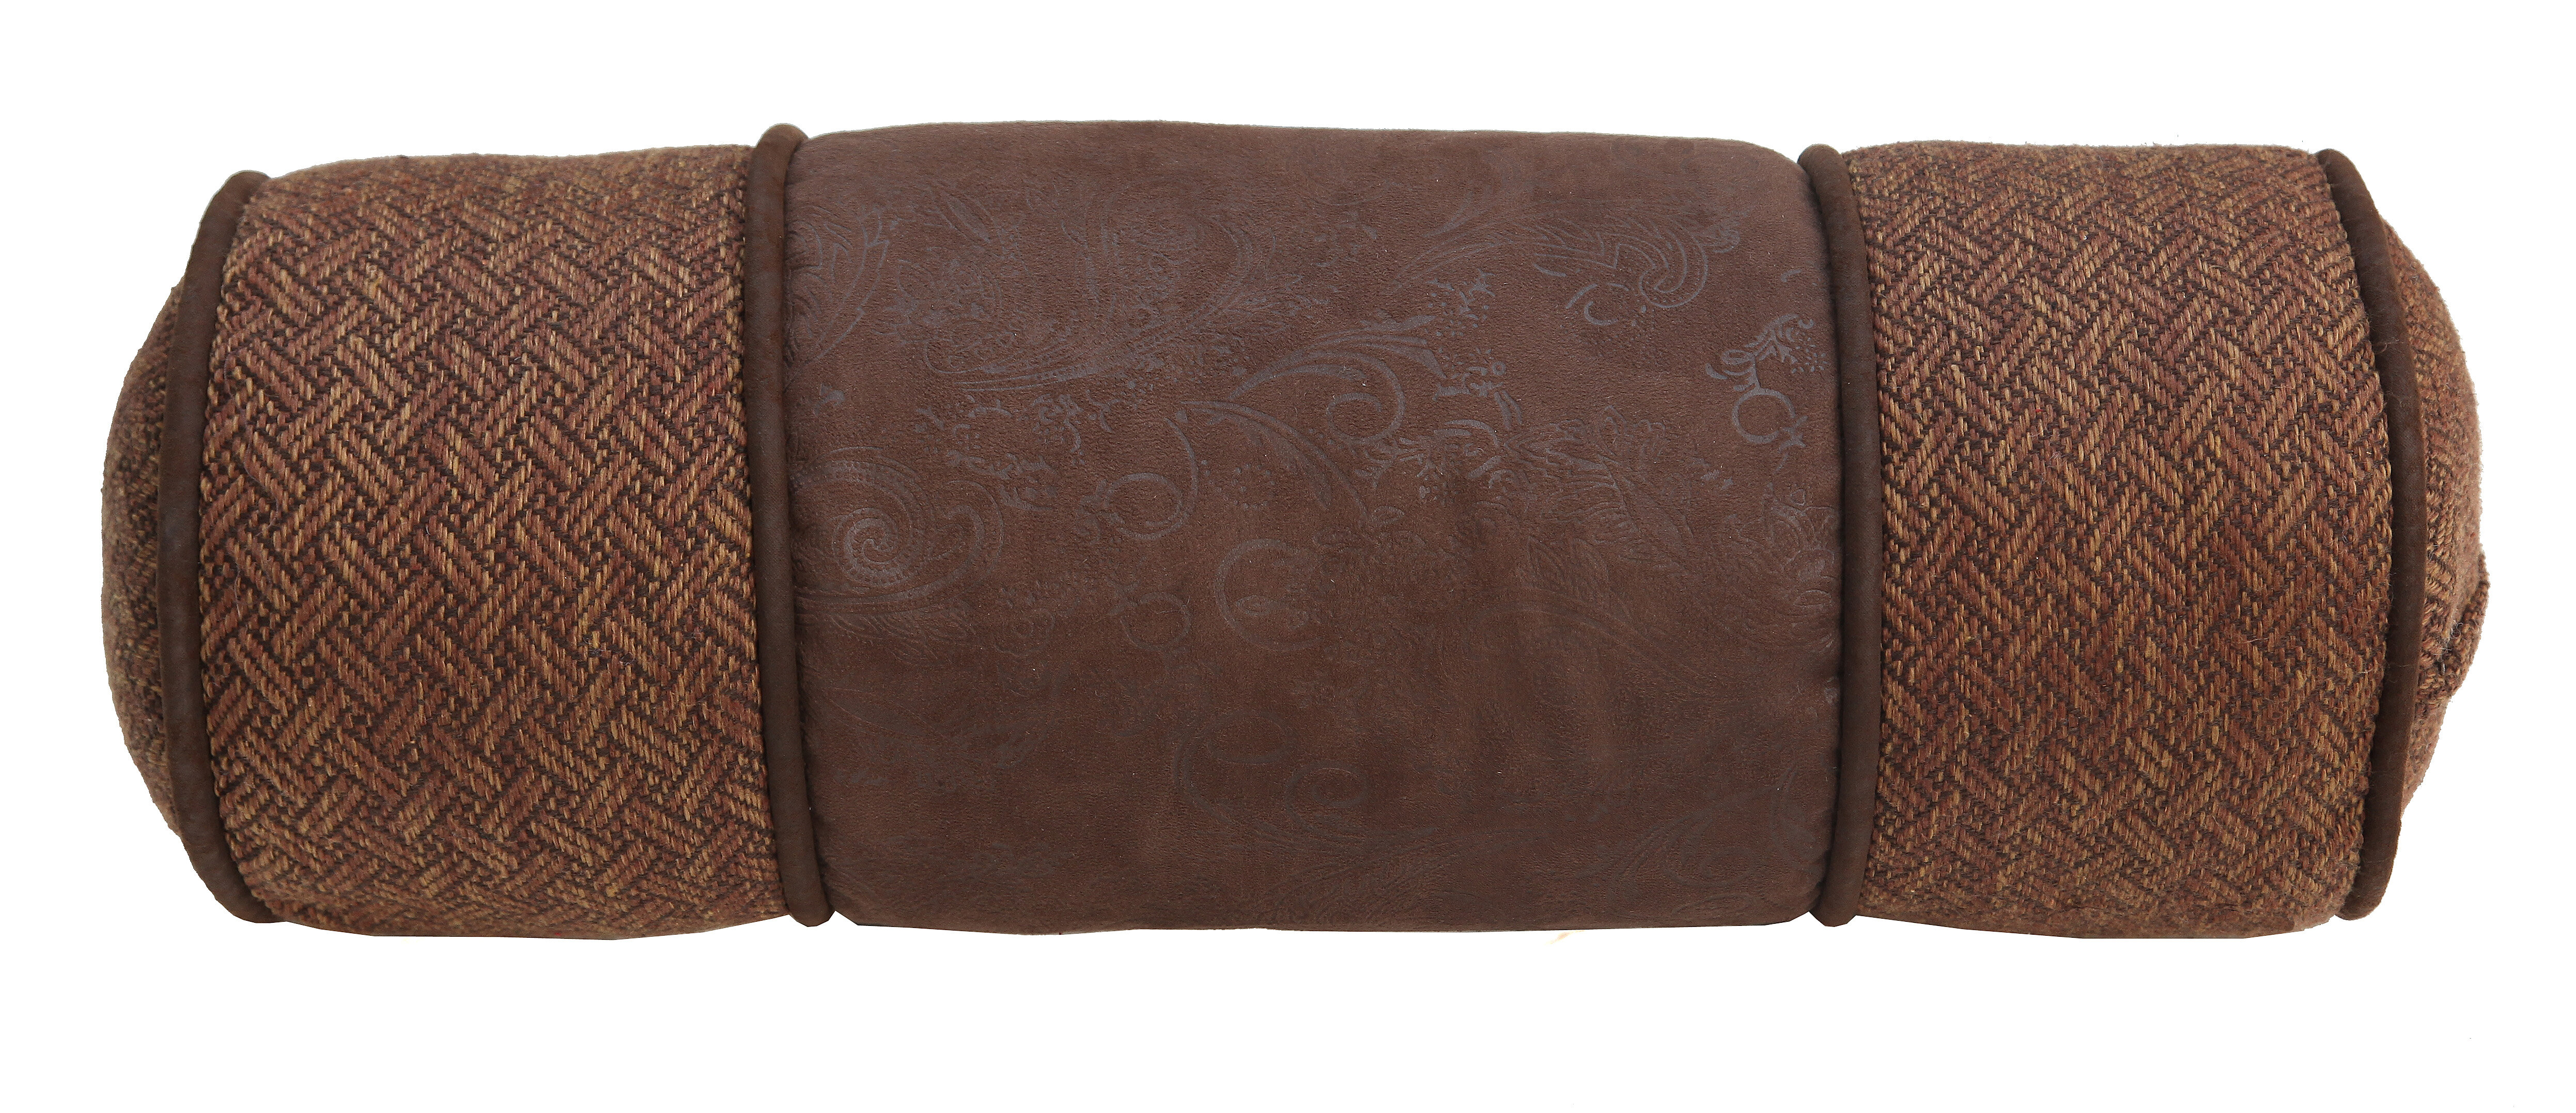 leather bolster pillow